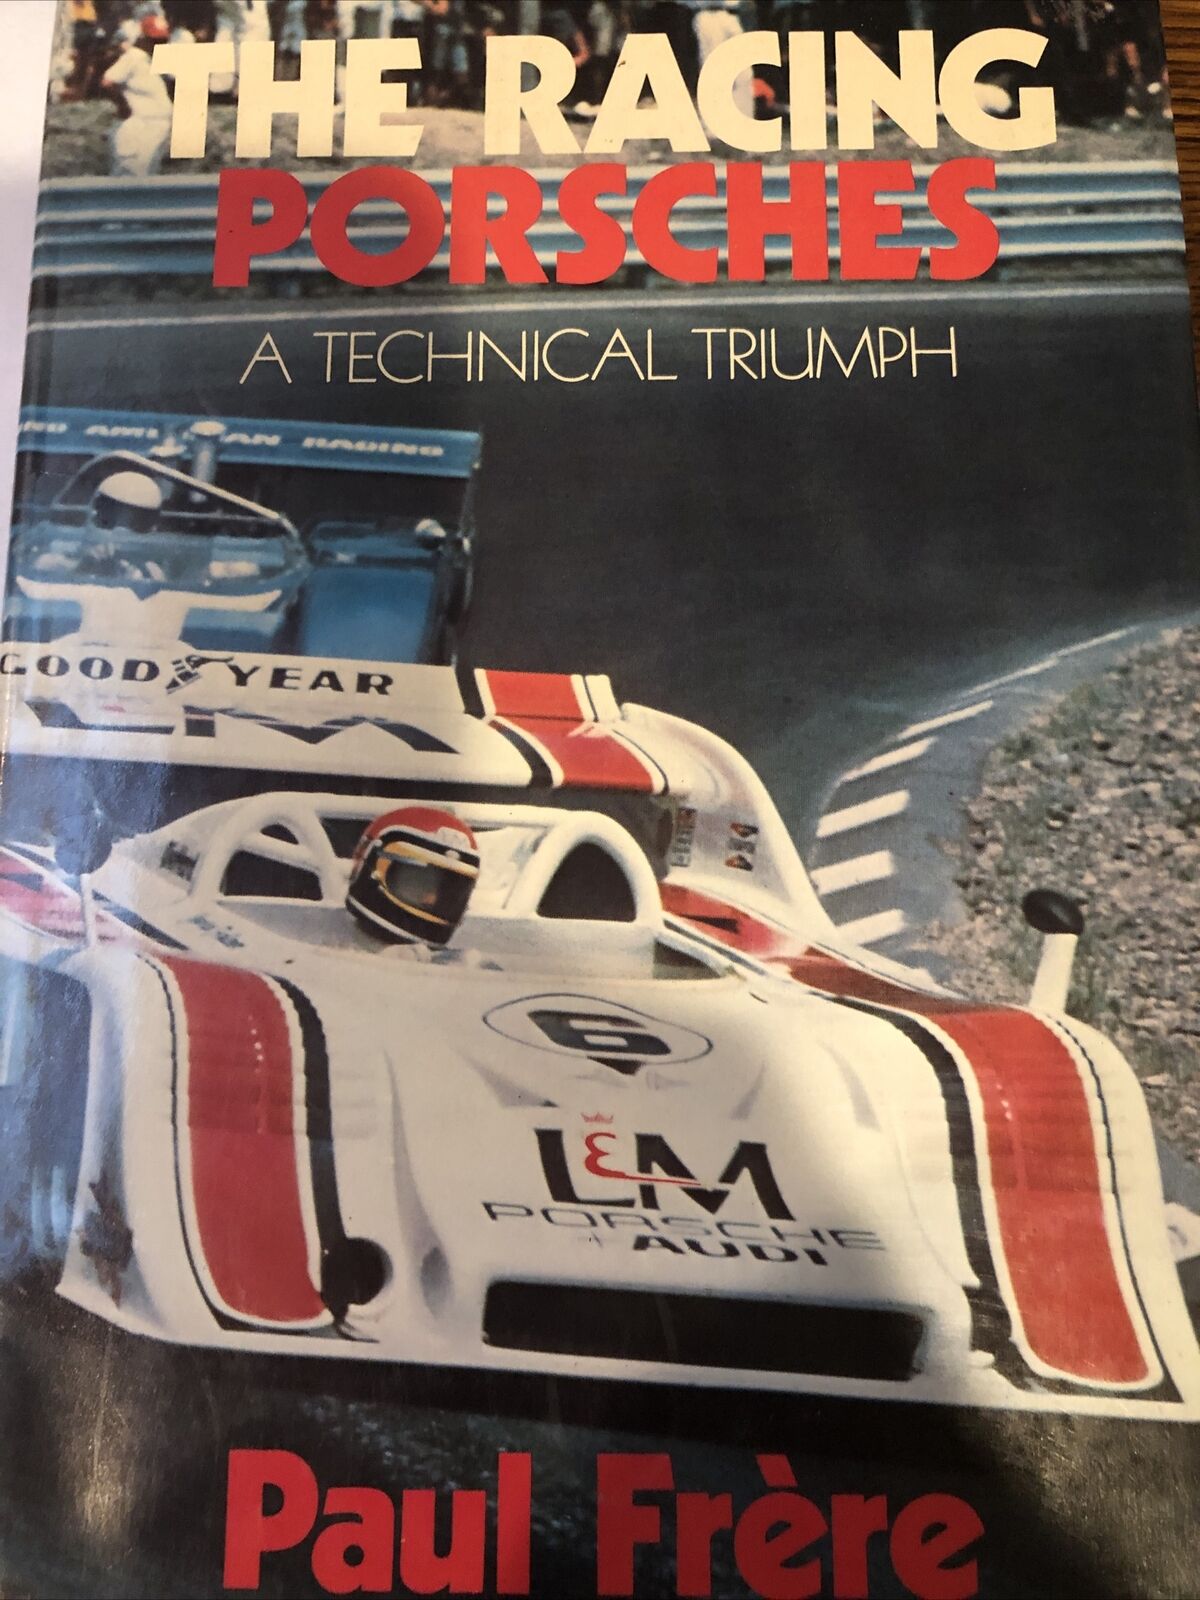 AWESOME THE RACING PORSCHES BOOK BY PAUL FRERE